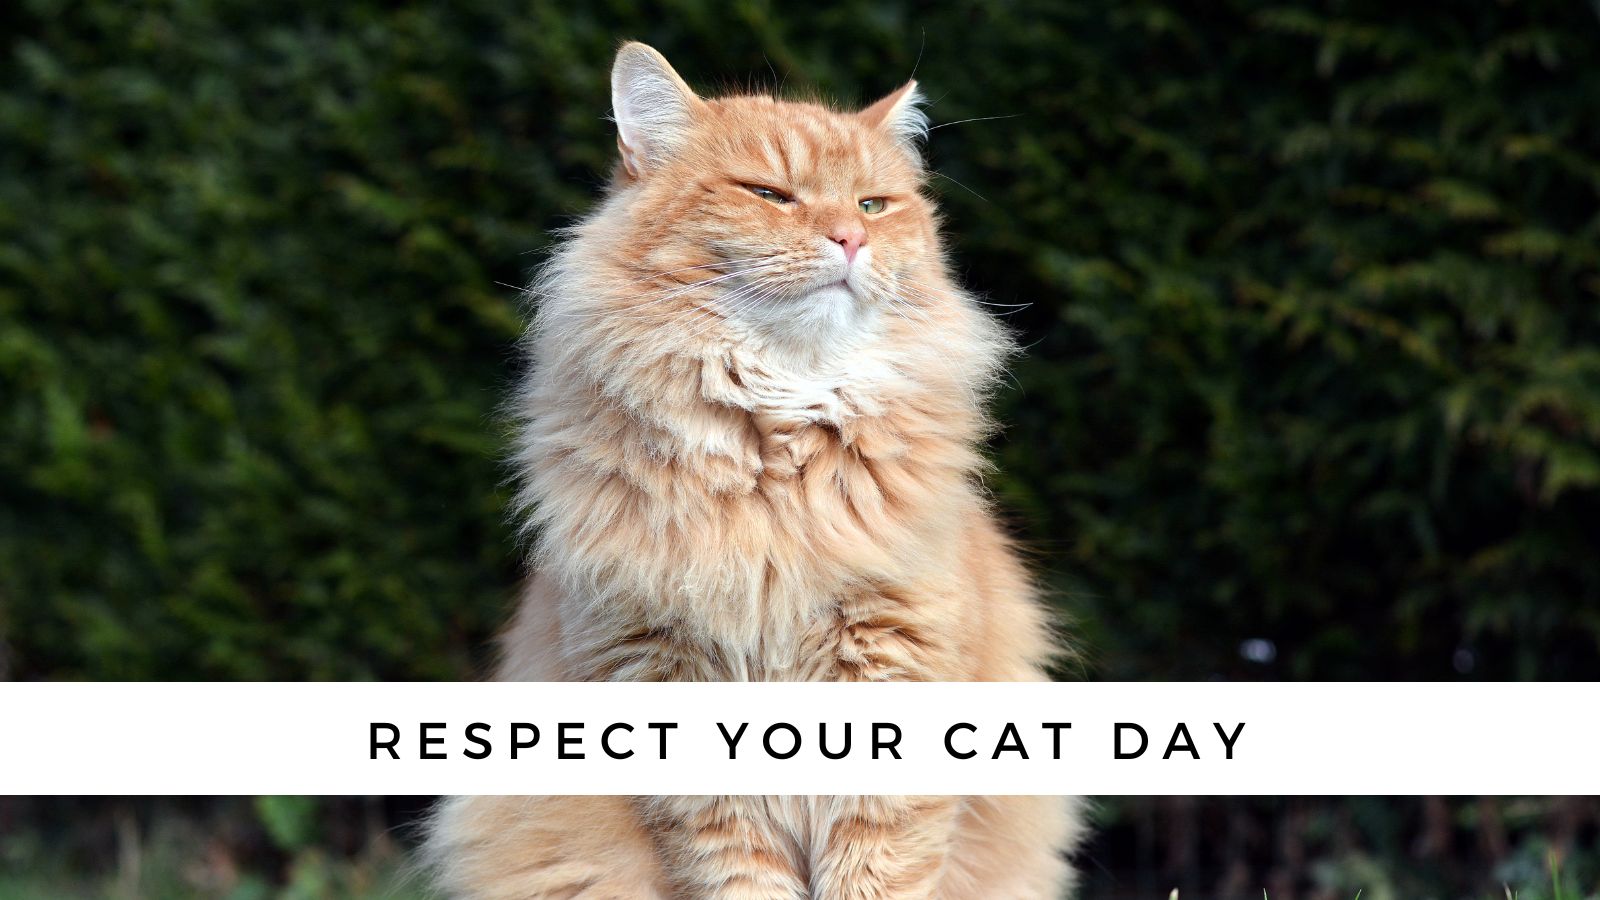 Respect Your Cat Day 4 Ways to Celebrate!